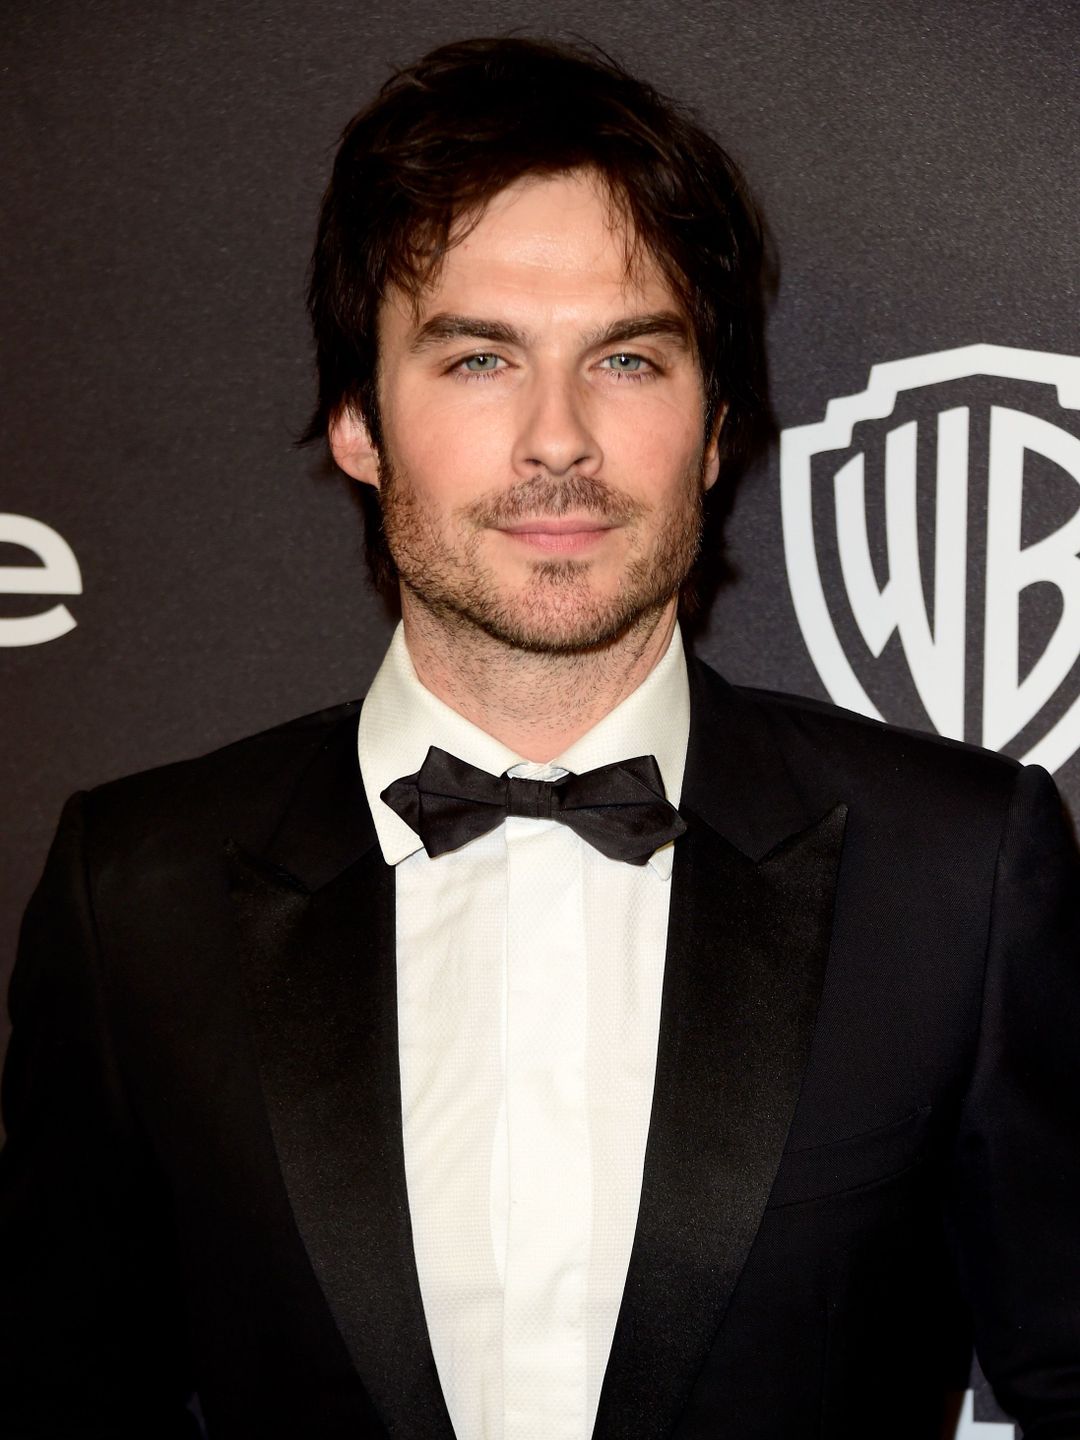 Ian Somerhalder how did he became famous